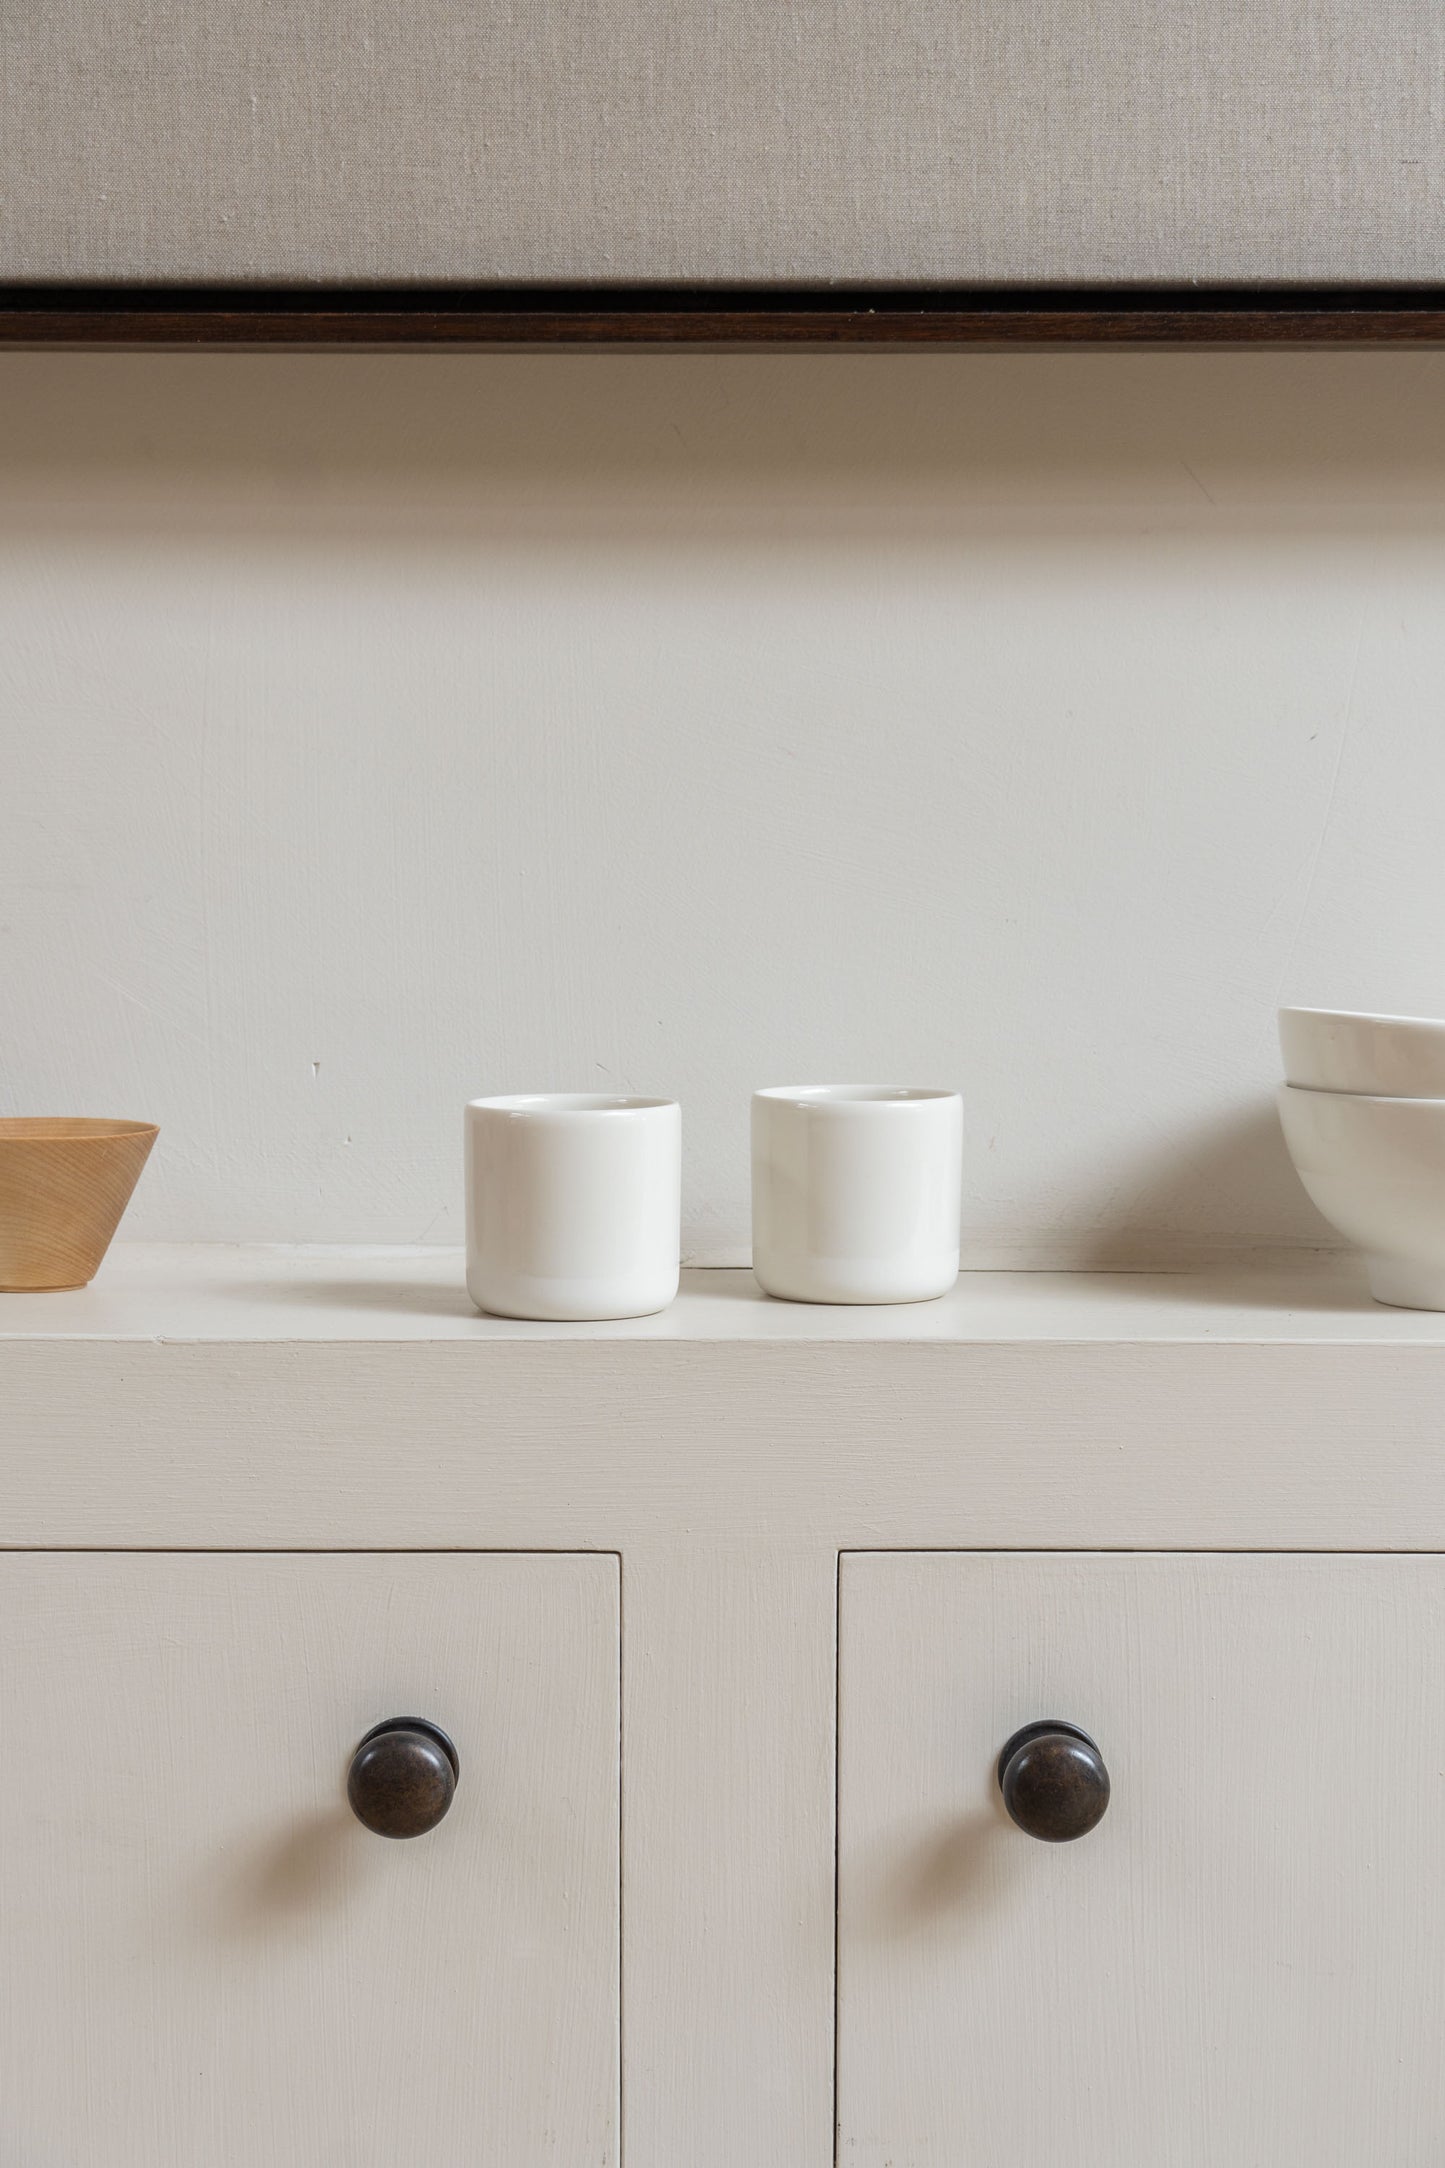 Two white Antibes Cups set on wall cabinet in white design interior.